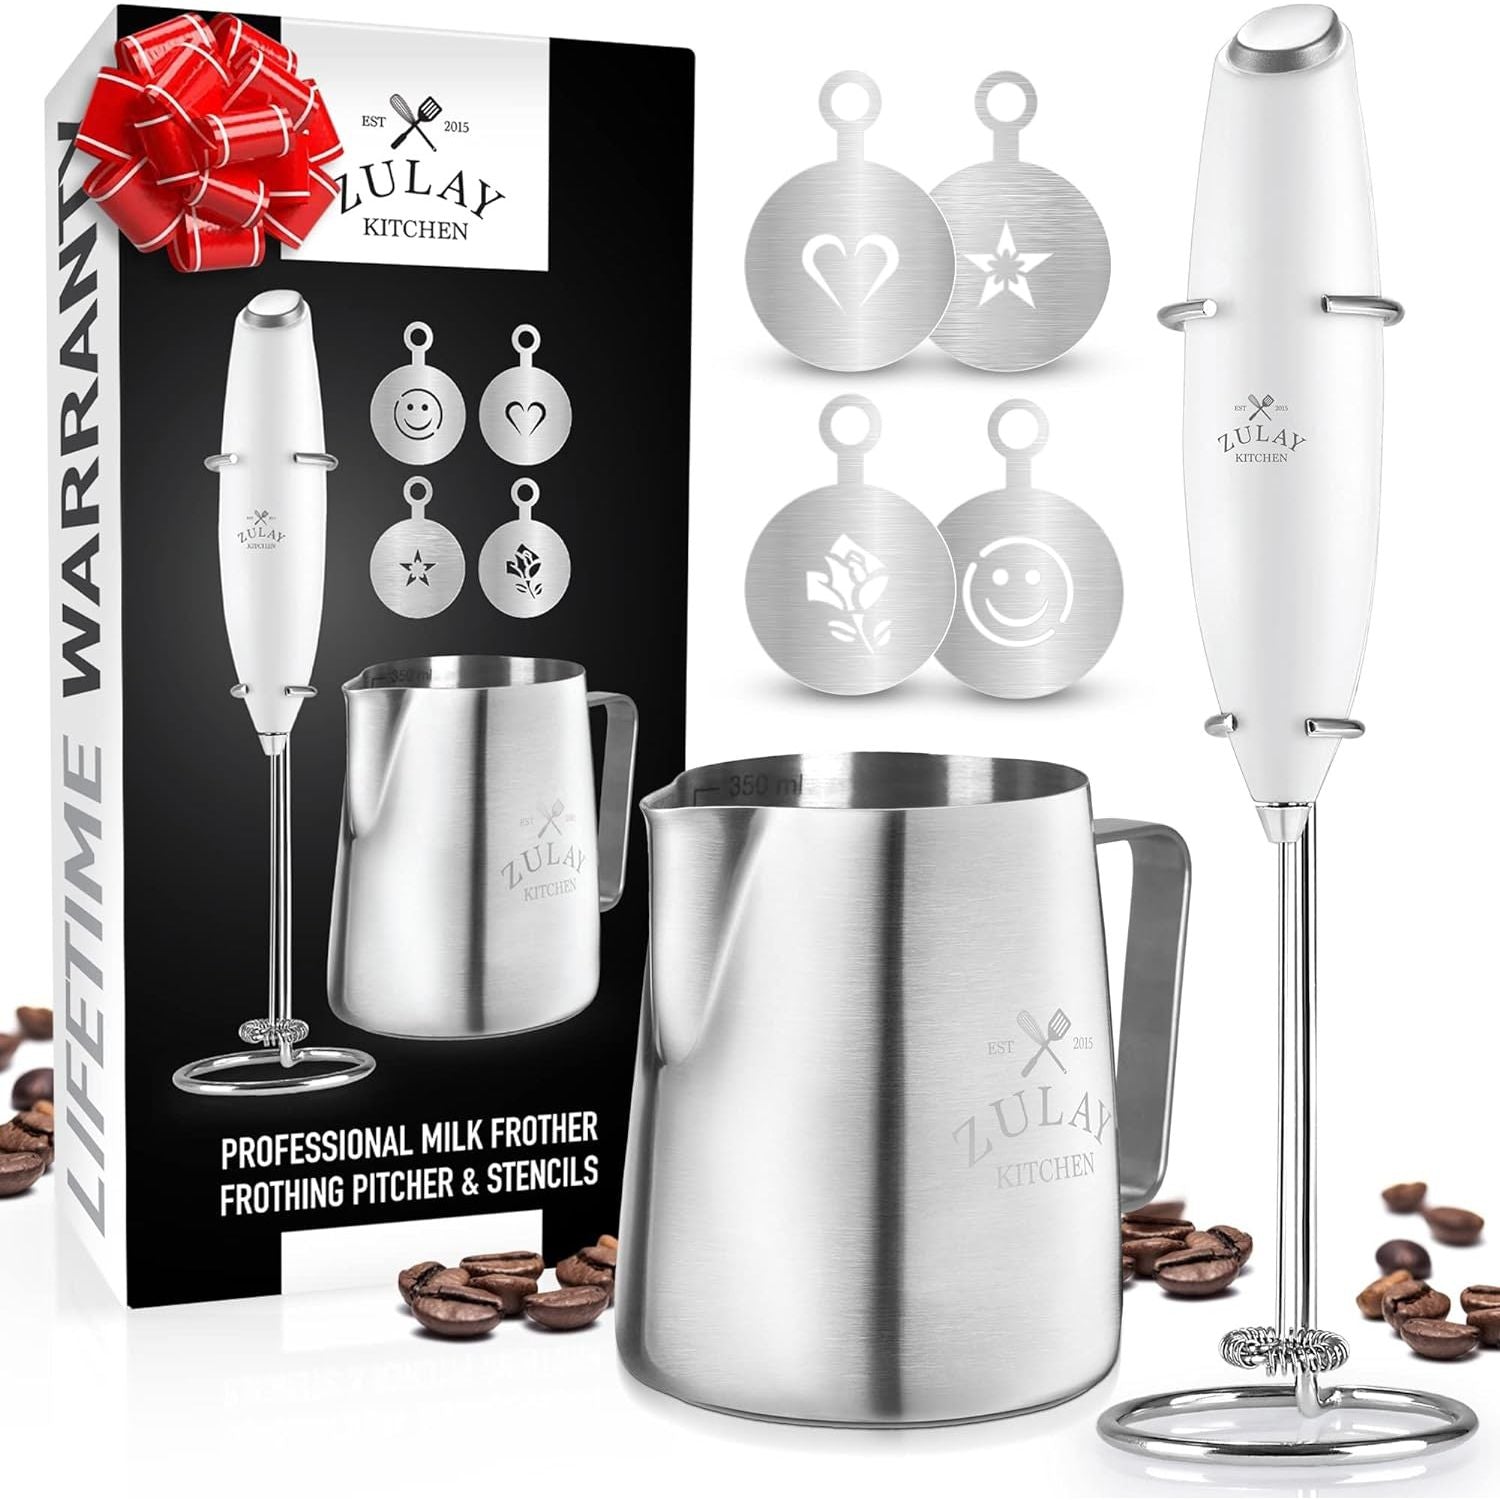 Complete Milk Frother Set